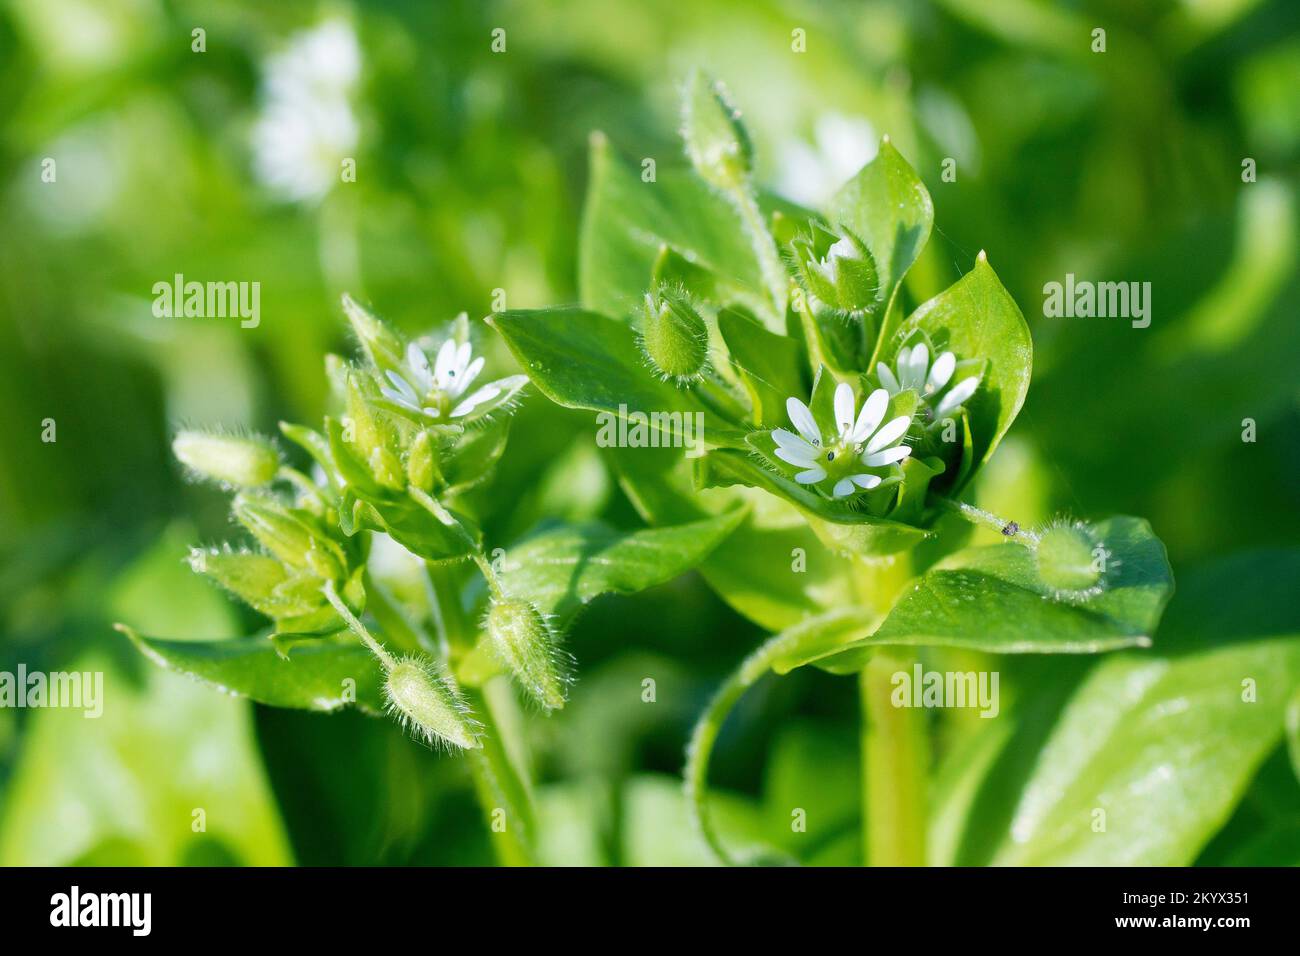 Common Chickweed (stellaria media), close up showing the white flowers and leaves of the low-growing, very common grassland plant. Stock Photo